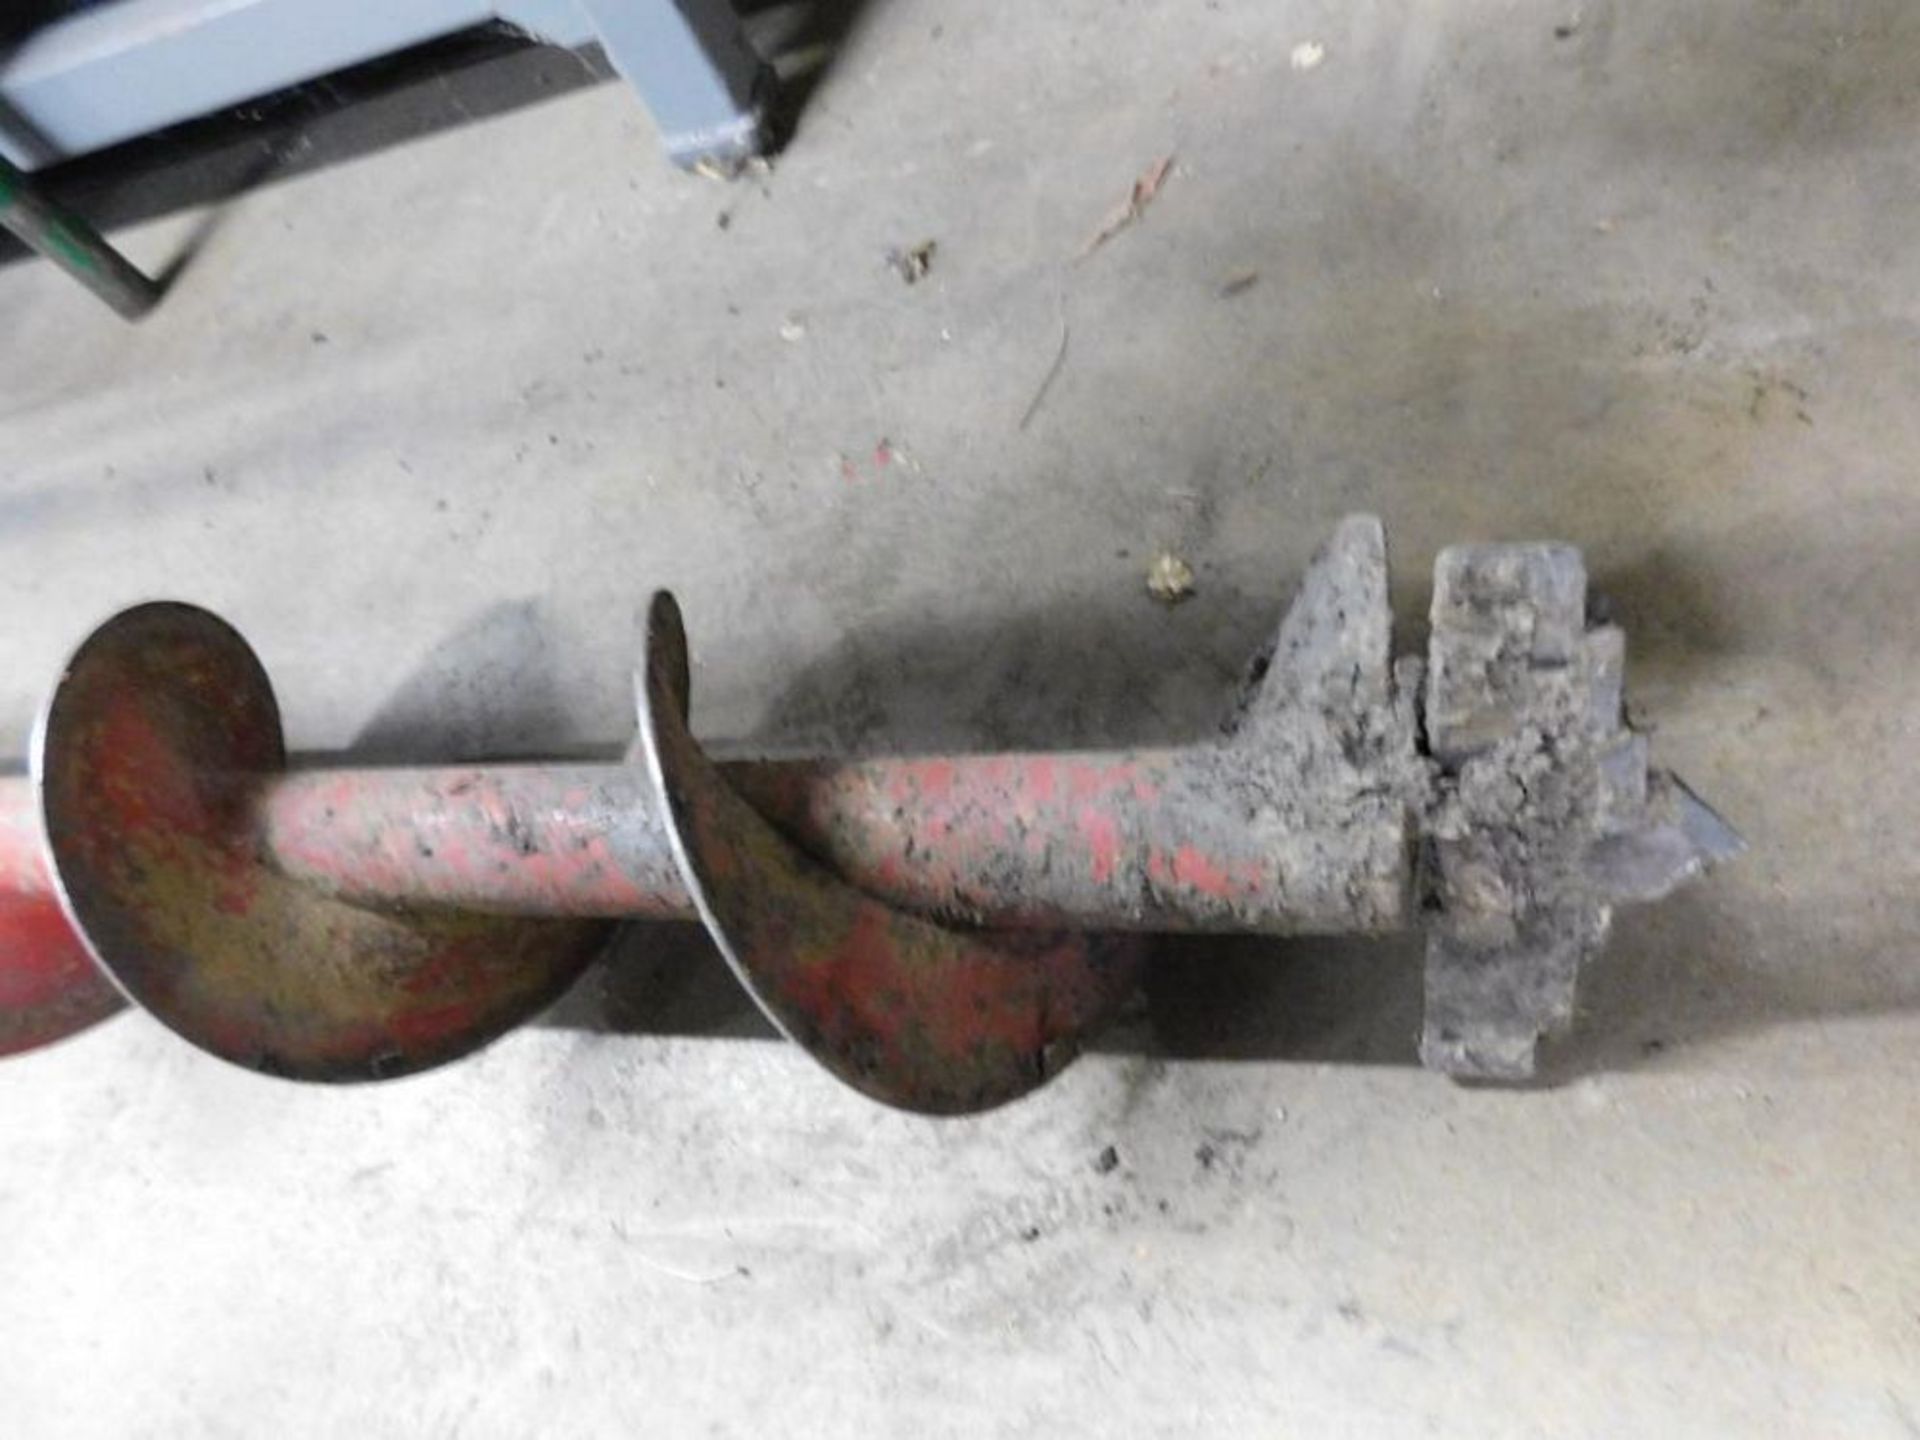 8" x 42" Post Hole Auger Bit (LOCATION: 318 N. Milwaukee Ave., Wheeling, IL 60090) - Image 2 of 2